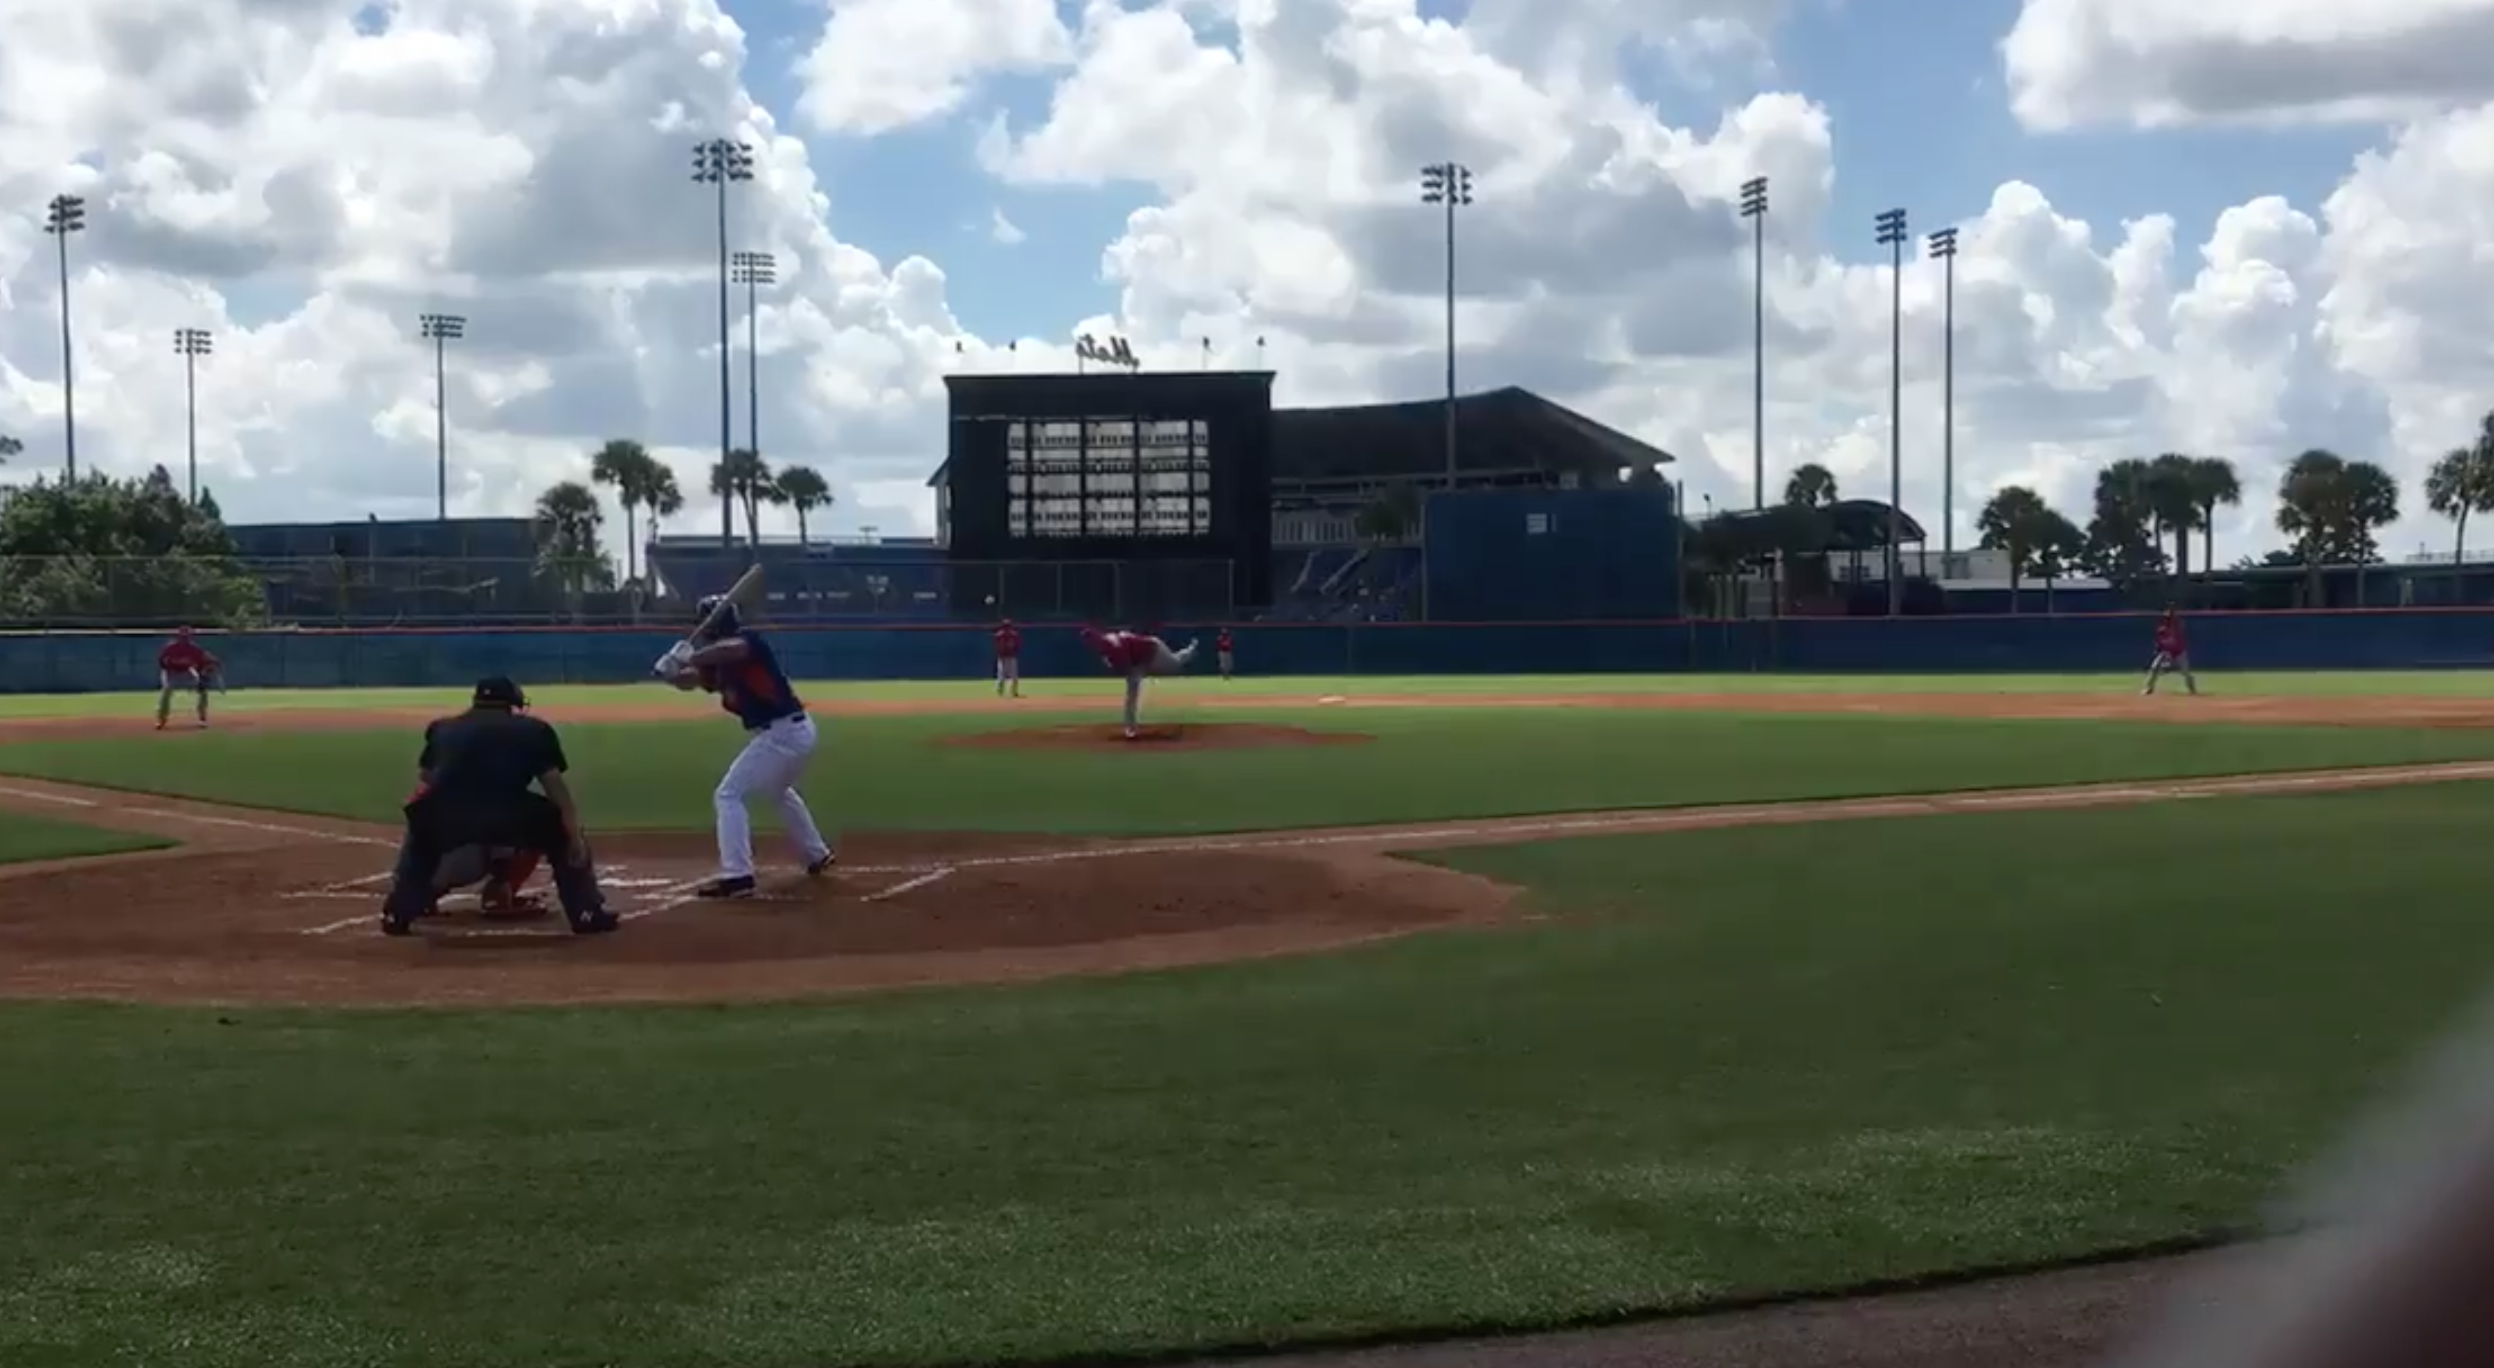 Tim Tebow Crushes Home Run With Very First Pitch He Sees In Baseball Debut - Daily Snark2494 x 1368